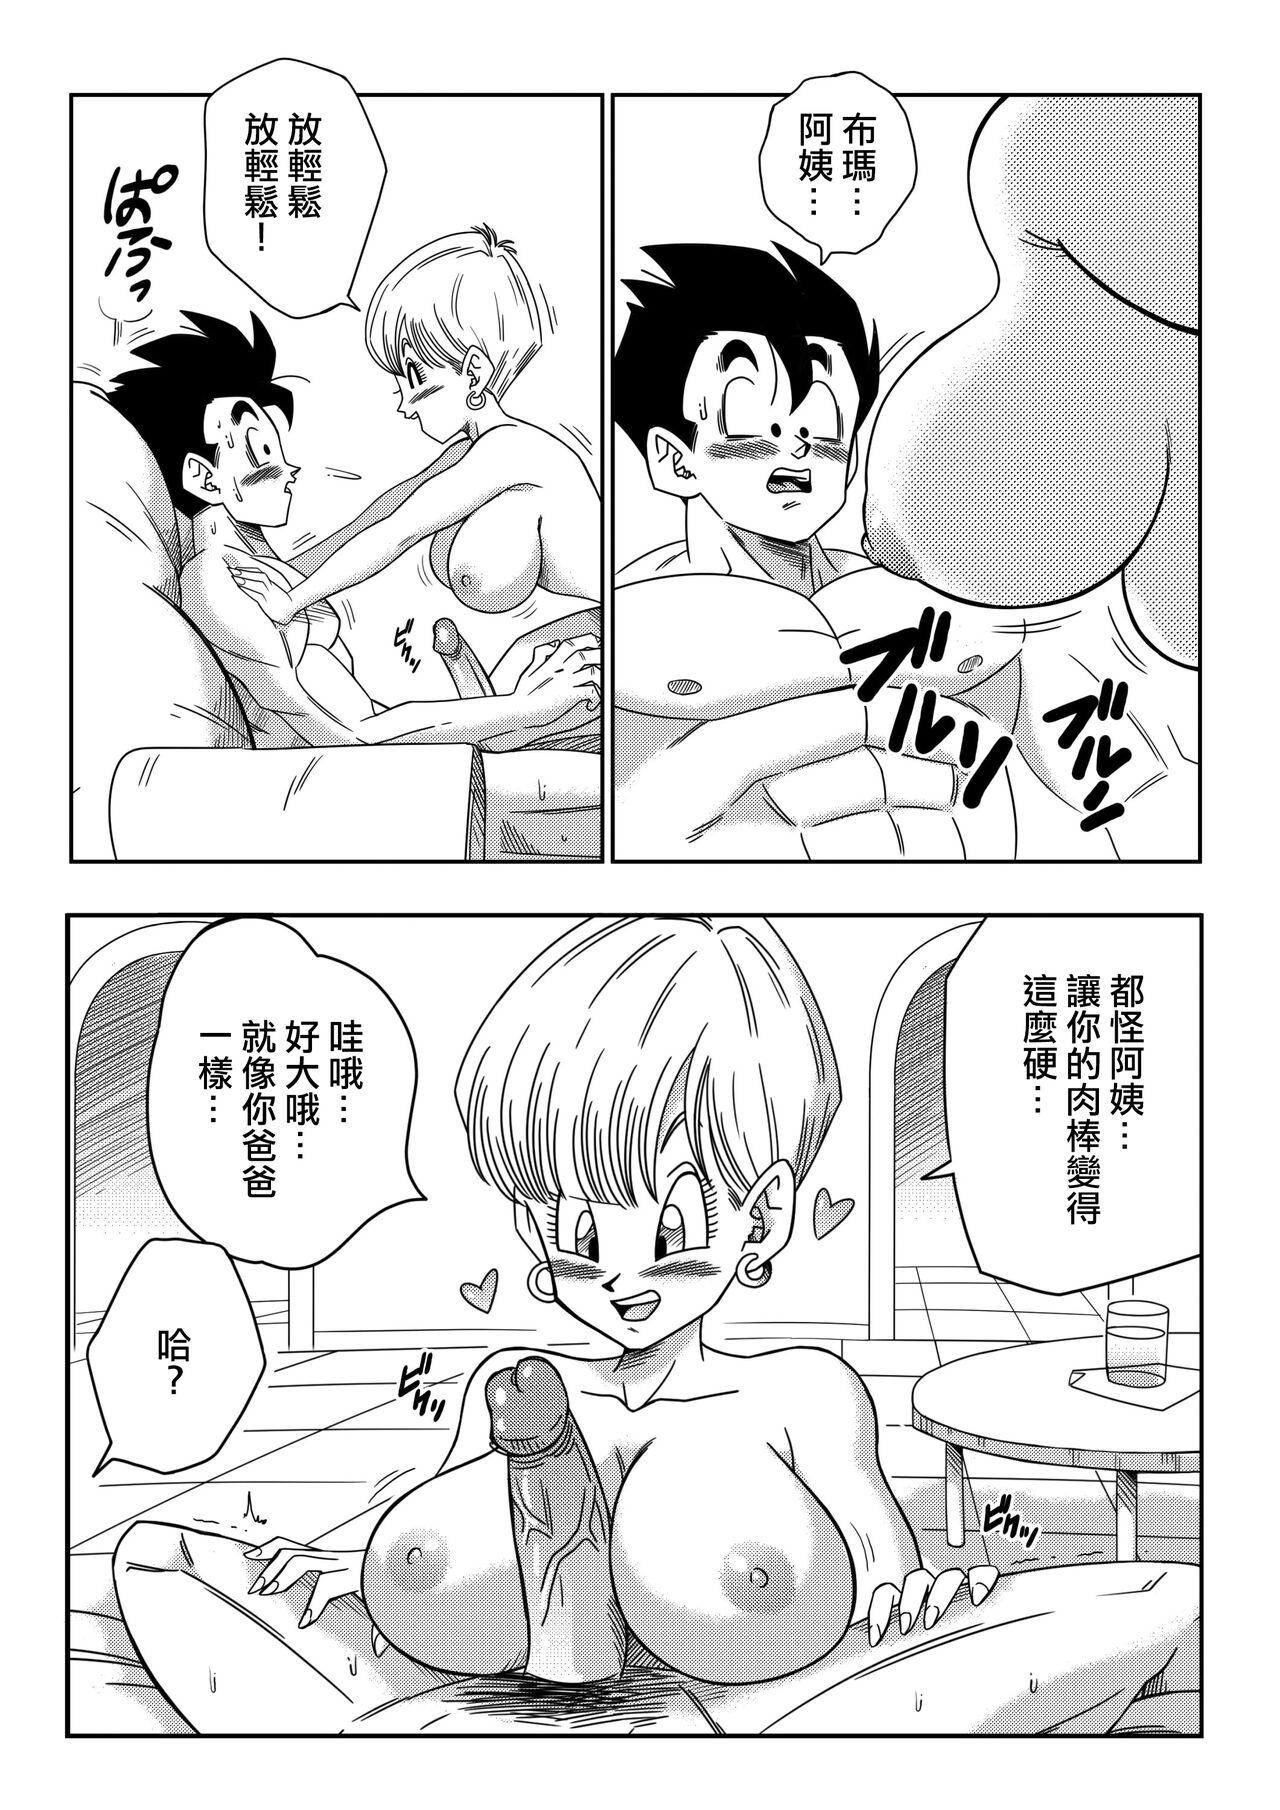 Exhibition LOVE TRIANGLE Z PART 3 - Dragon ball z Groping - Page 6